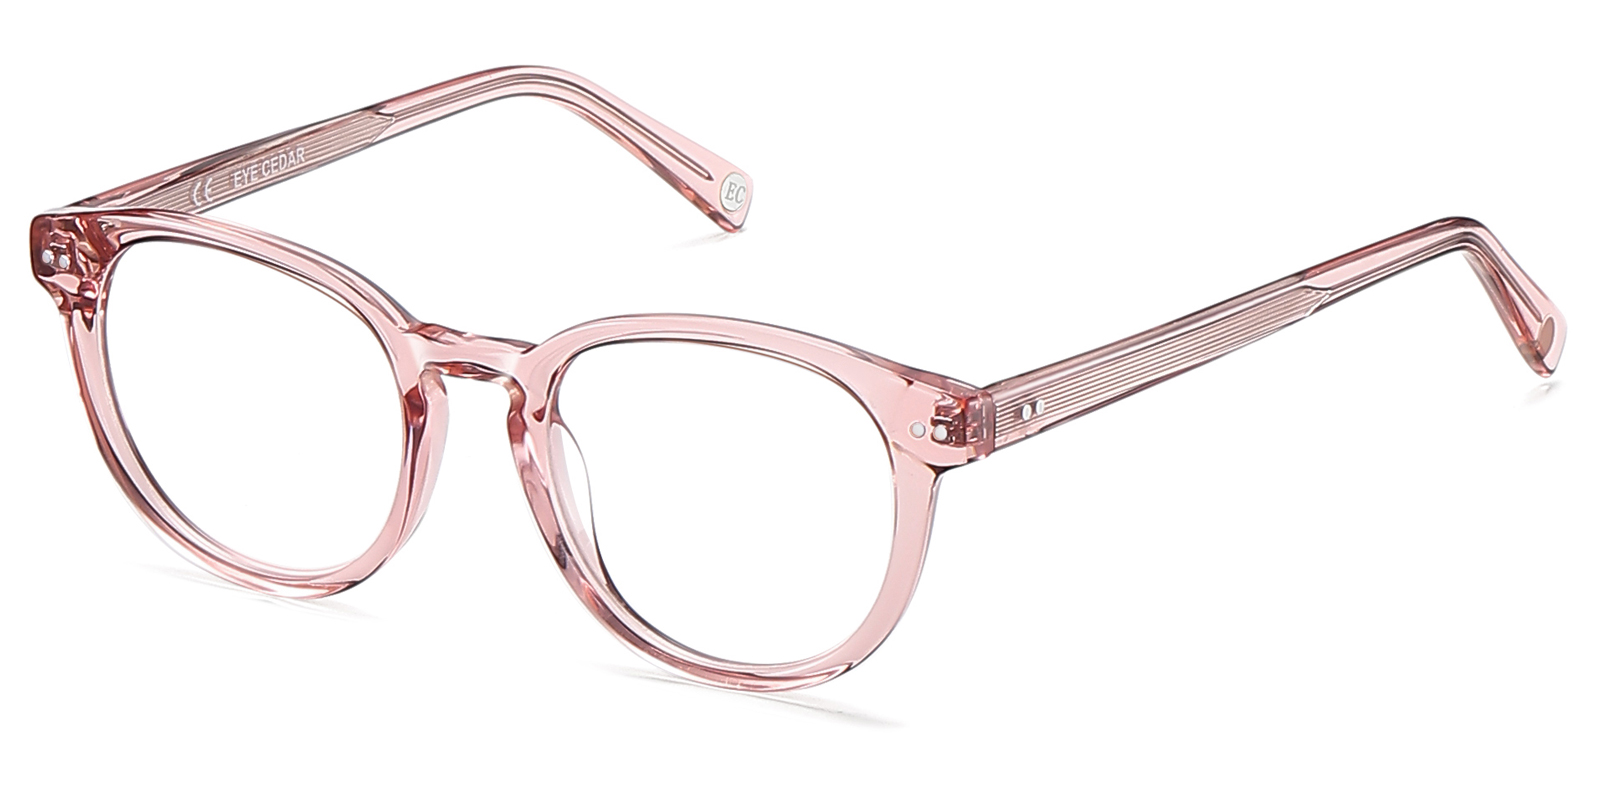 Yanaa Blue Light Blocking Glasses Women Pink Round Style with 1.57 Mid-Index Resin Lenses Computer Glasses